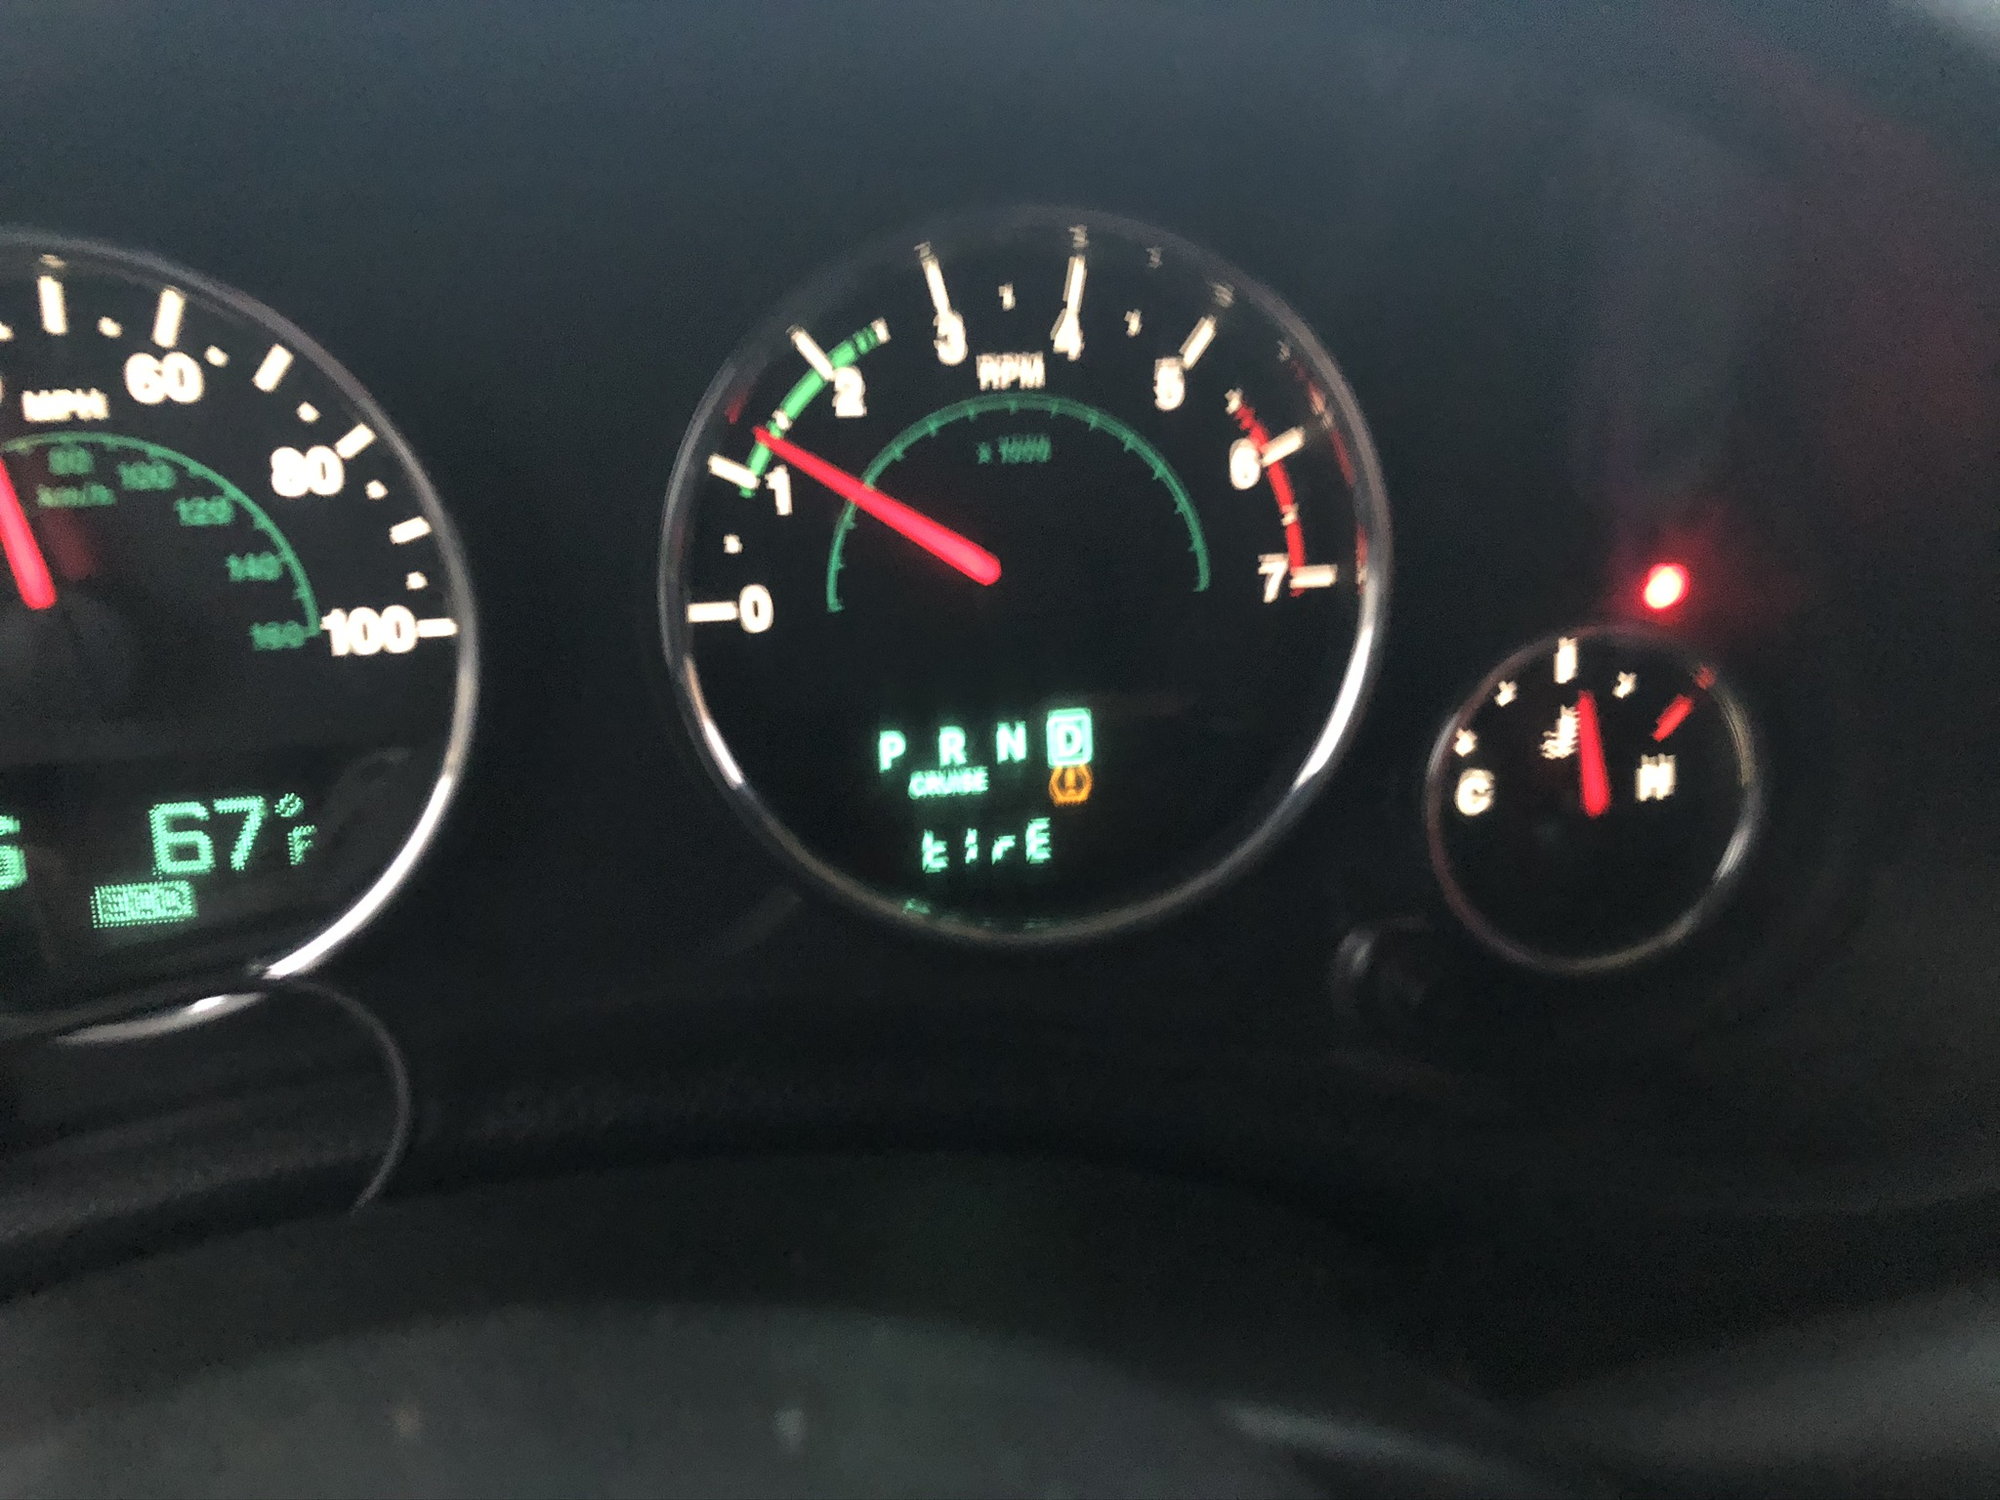 Intermittent temp warning light  - The top destination for Jeep  JK and JL Wrangler news, rumors, and discussion